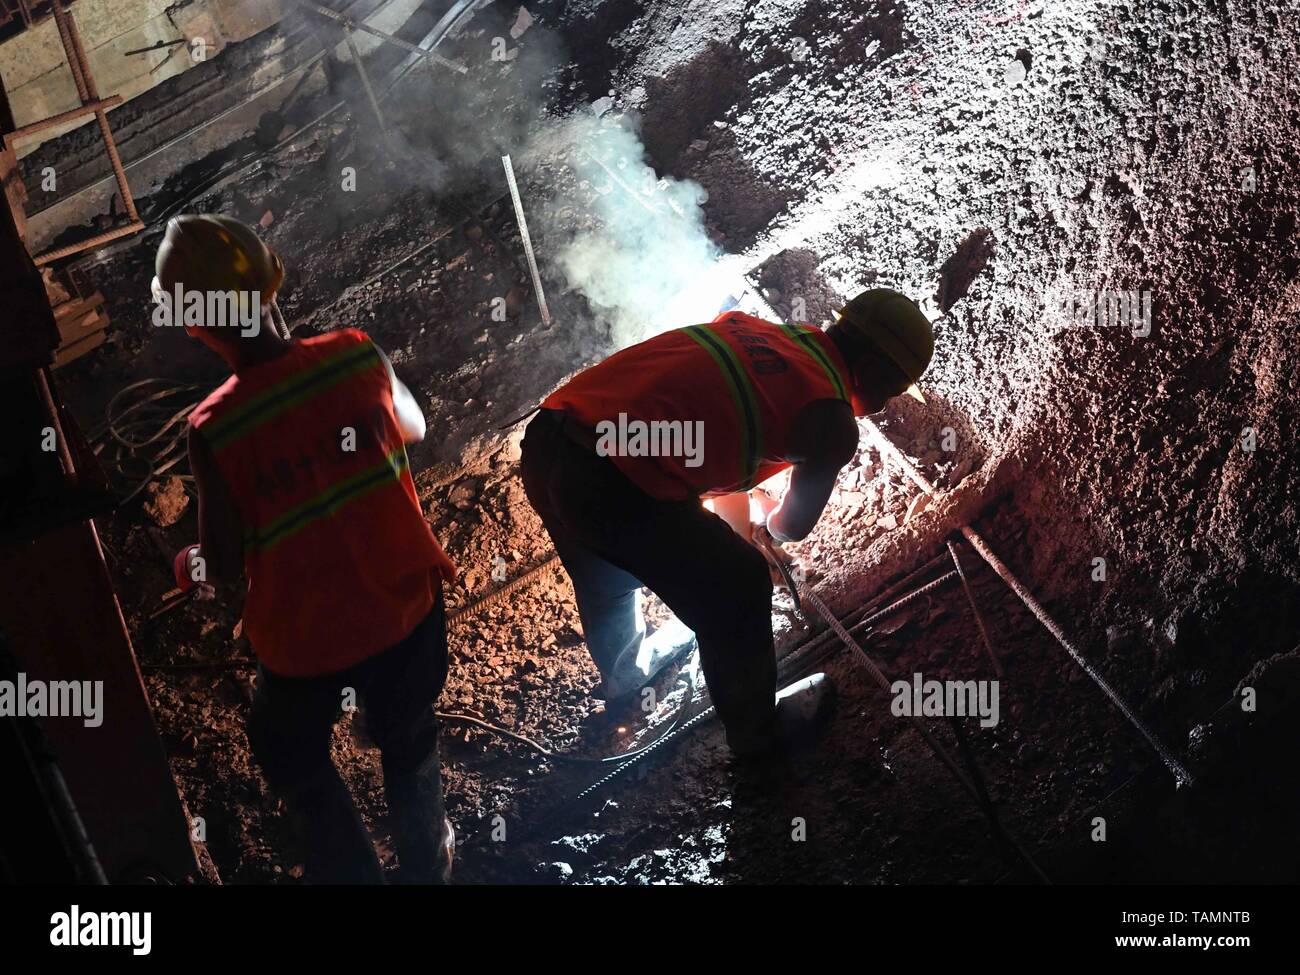 puer-25th-may-2019-constructors-work-at-the-construction-site-of-dajianshan-railway-tunnel-of-the-yuxi-mohan-railway-in-southwest-chinas-yunnan-province-may-25-2019-credit-yang-zongyouxinhuaalamy-live-news-TAMNTB.jpg